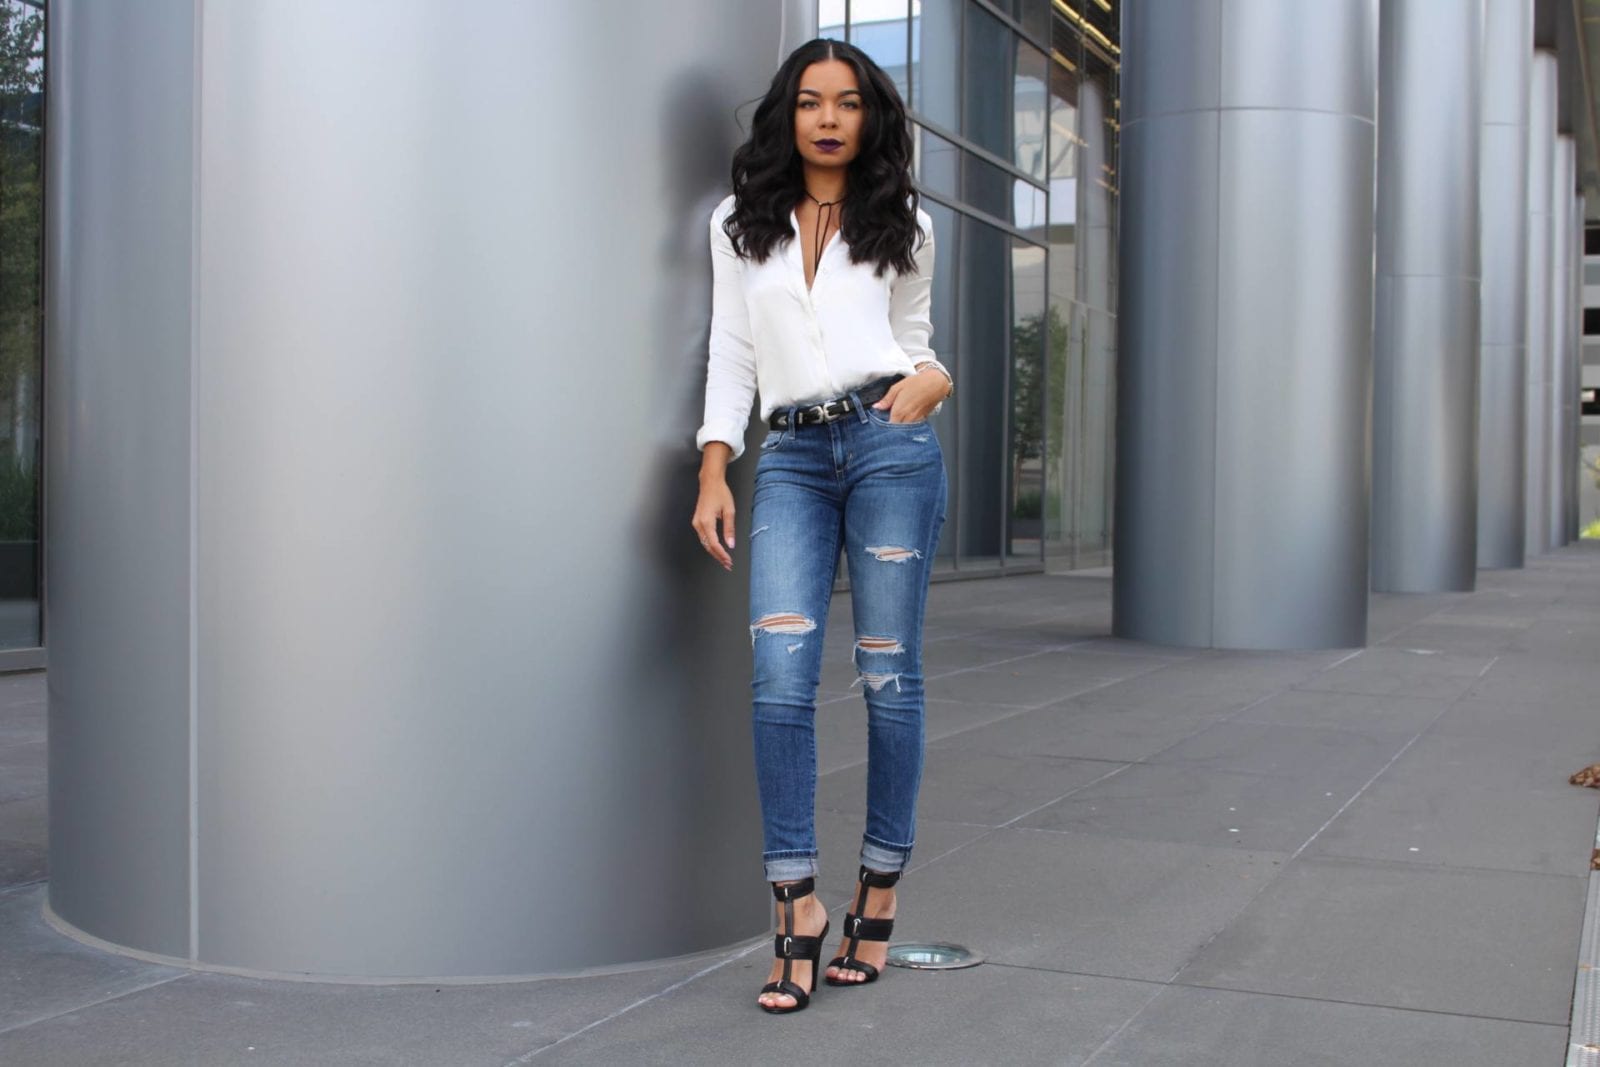 Silk Blouse, Joe's Jeans and L.A.M.B. Mules | The B Werd December Style Guide